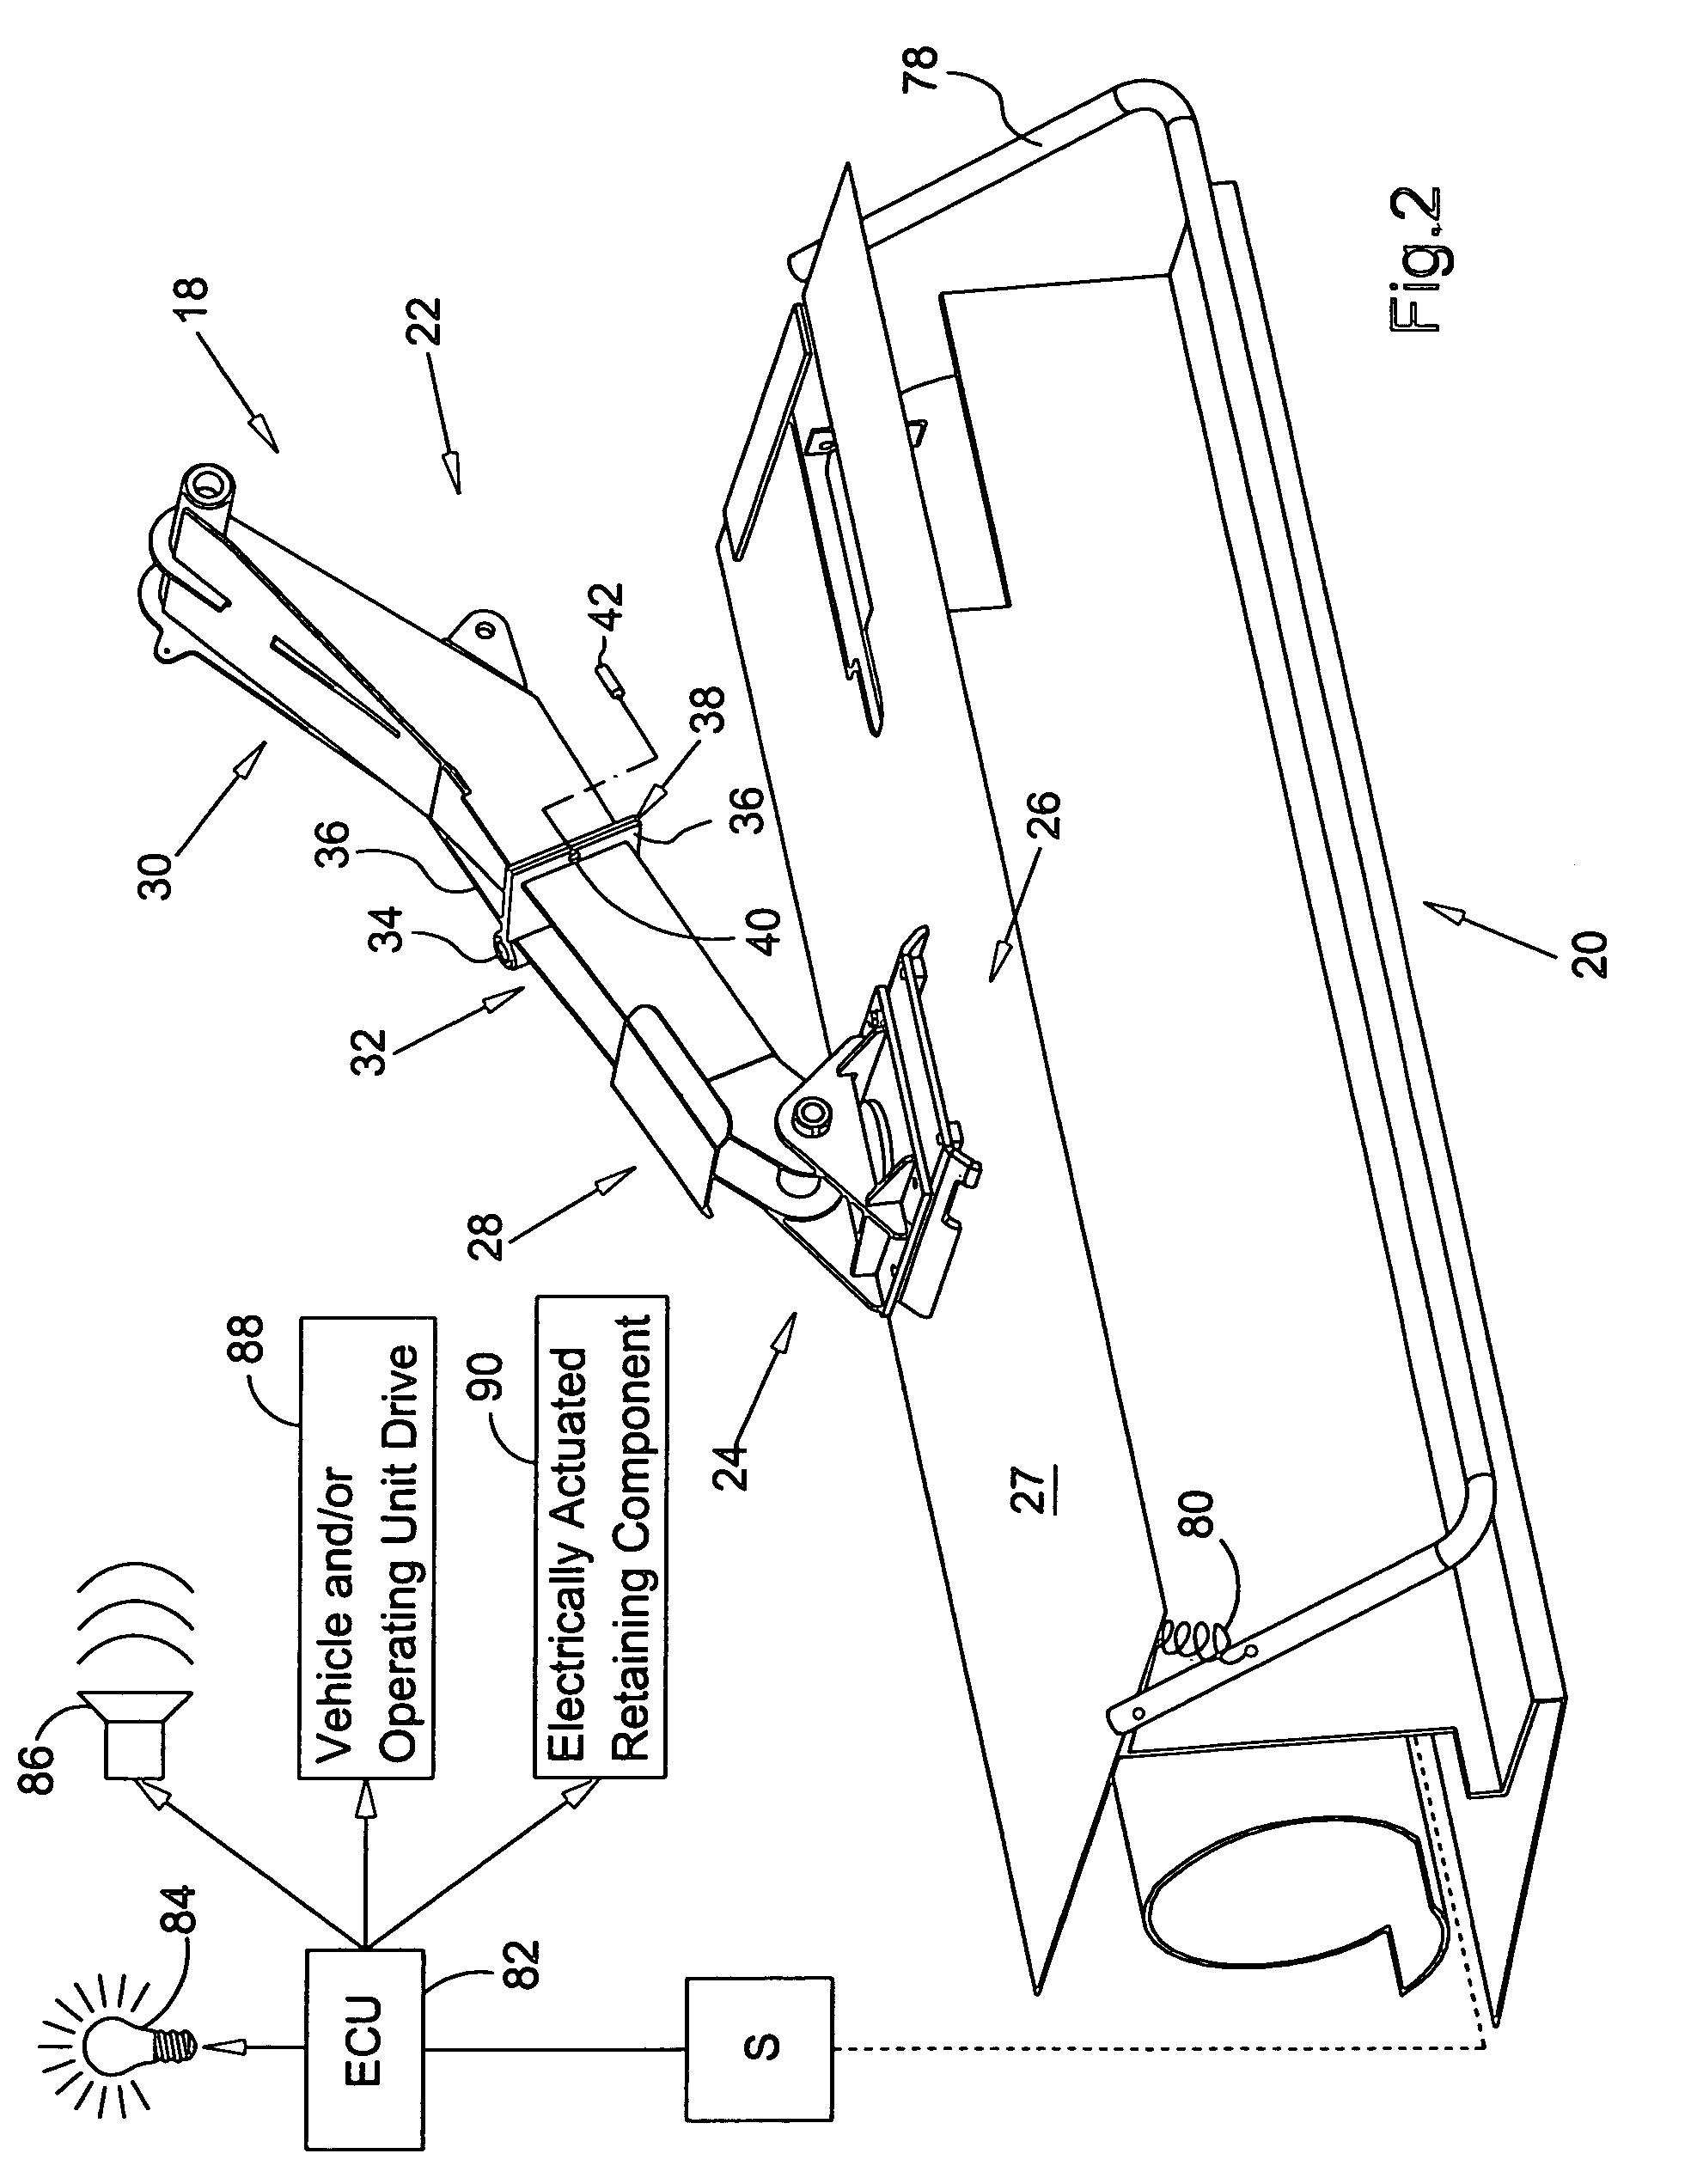 Retainer arrangement connecting operating unit to a vehicle